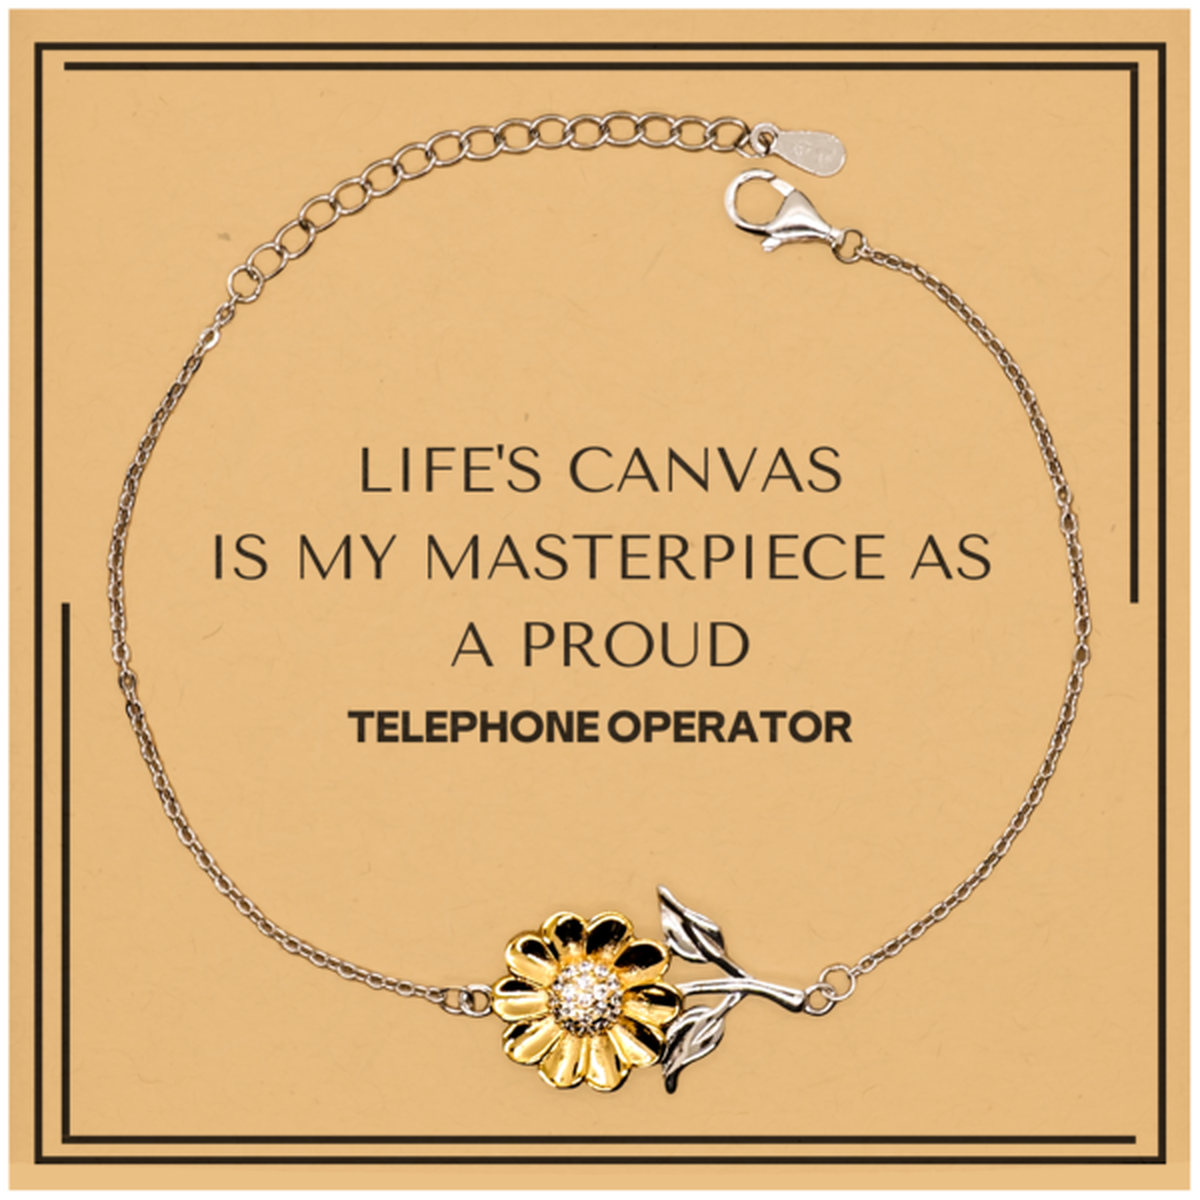 Proud Telephone Operator Gifts, Life's canvas is my masterpiece, Epic Birthday Christmas Unique Sunflower Bracelet For Telephone Operator, Coworkers, Men, Women, Friends